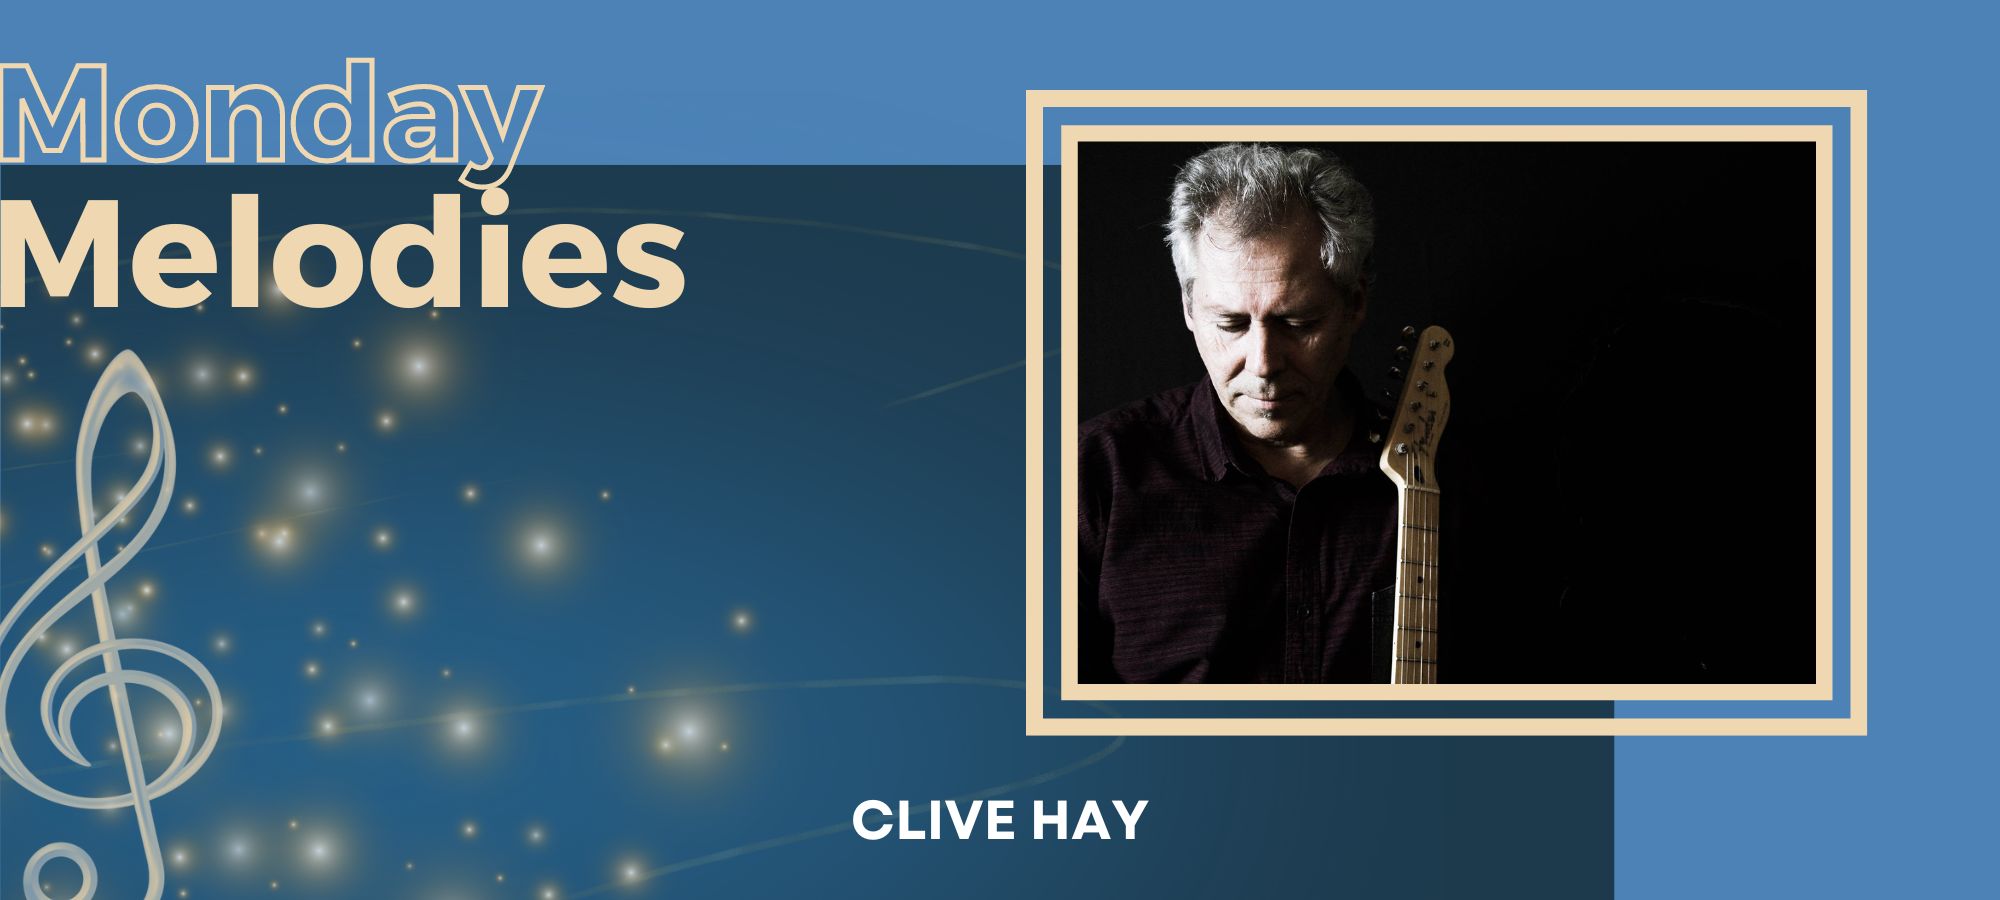 Monday Melodies with Clive Hay